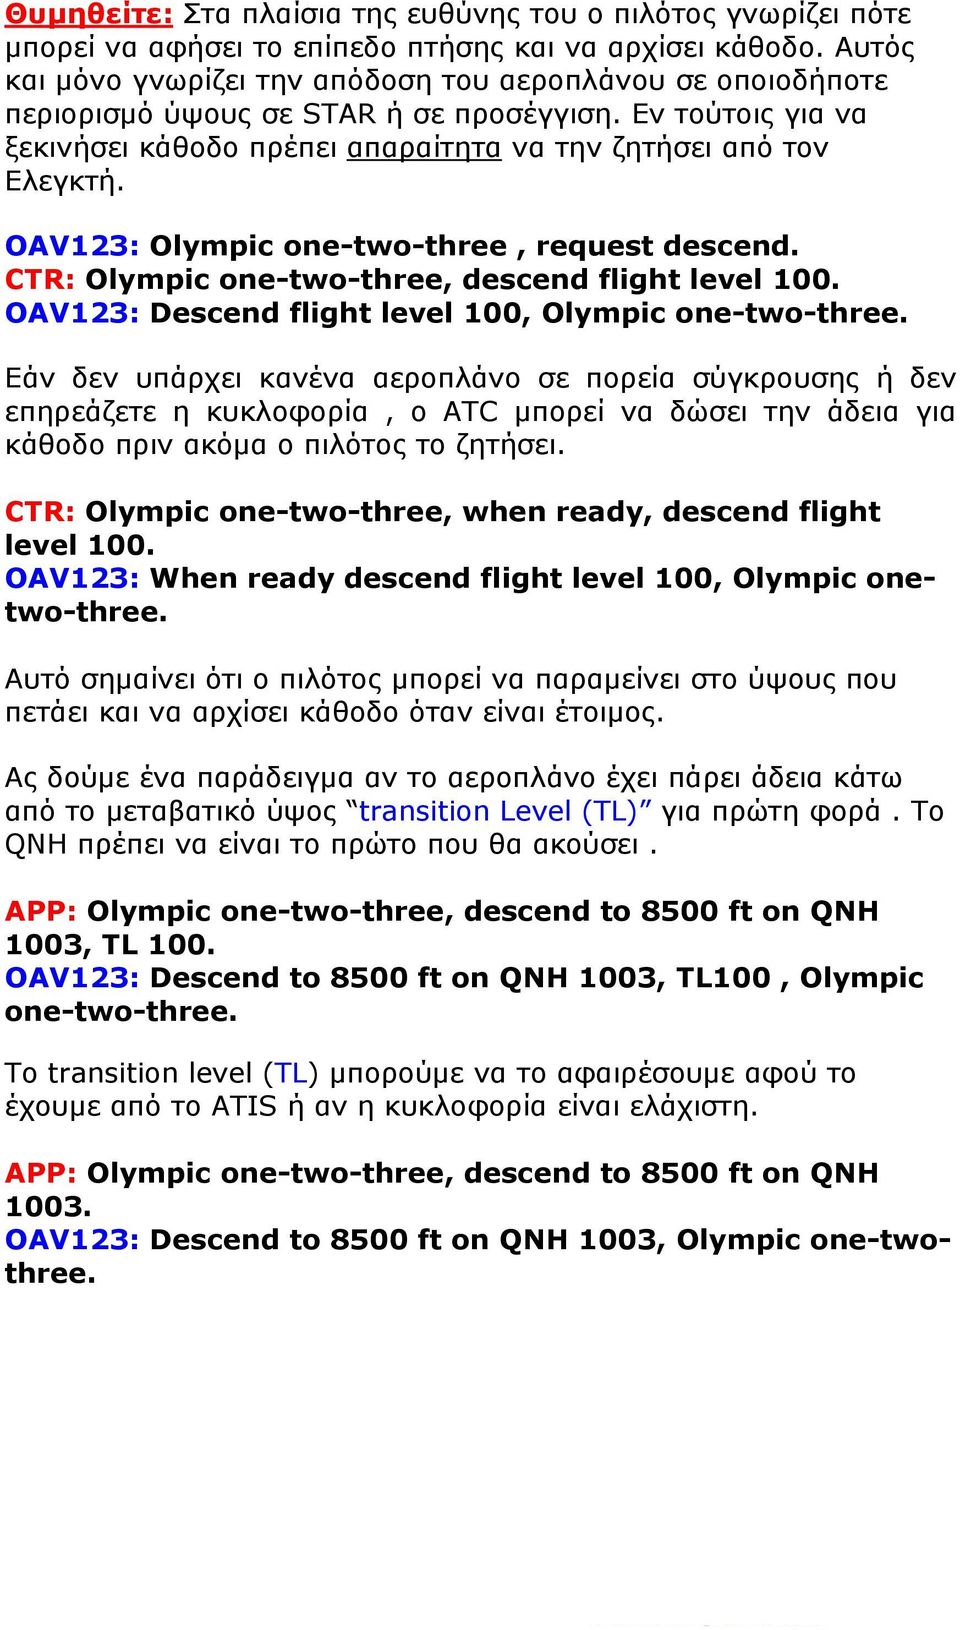 OAV123: Olympic one-two-three, request descend. CTR: Olympic one-two-three, descend flight level 100. OAV123: Descend flight level 100, Olympic one-two-three.